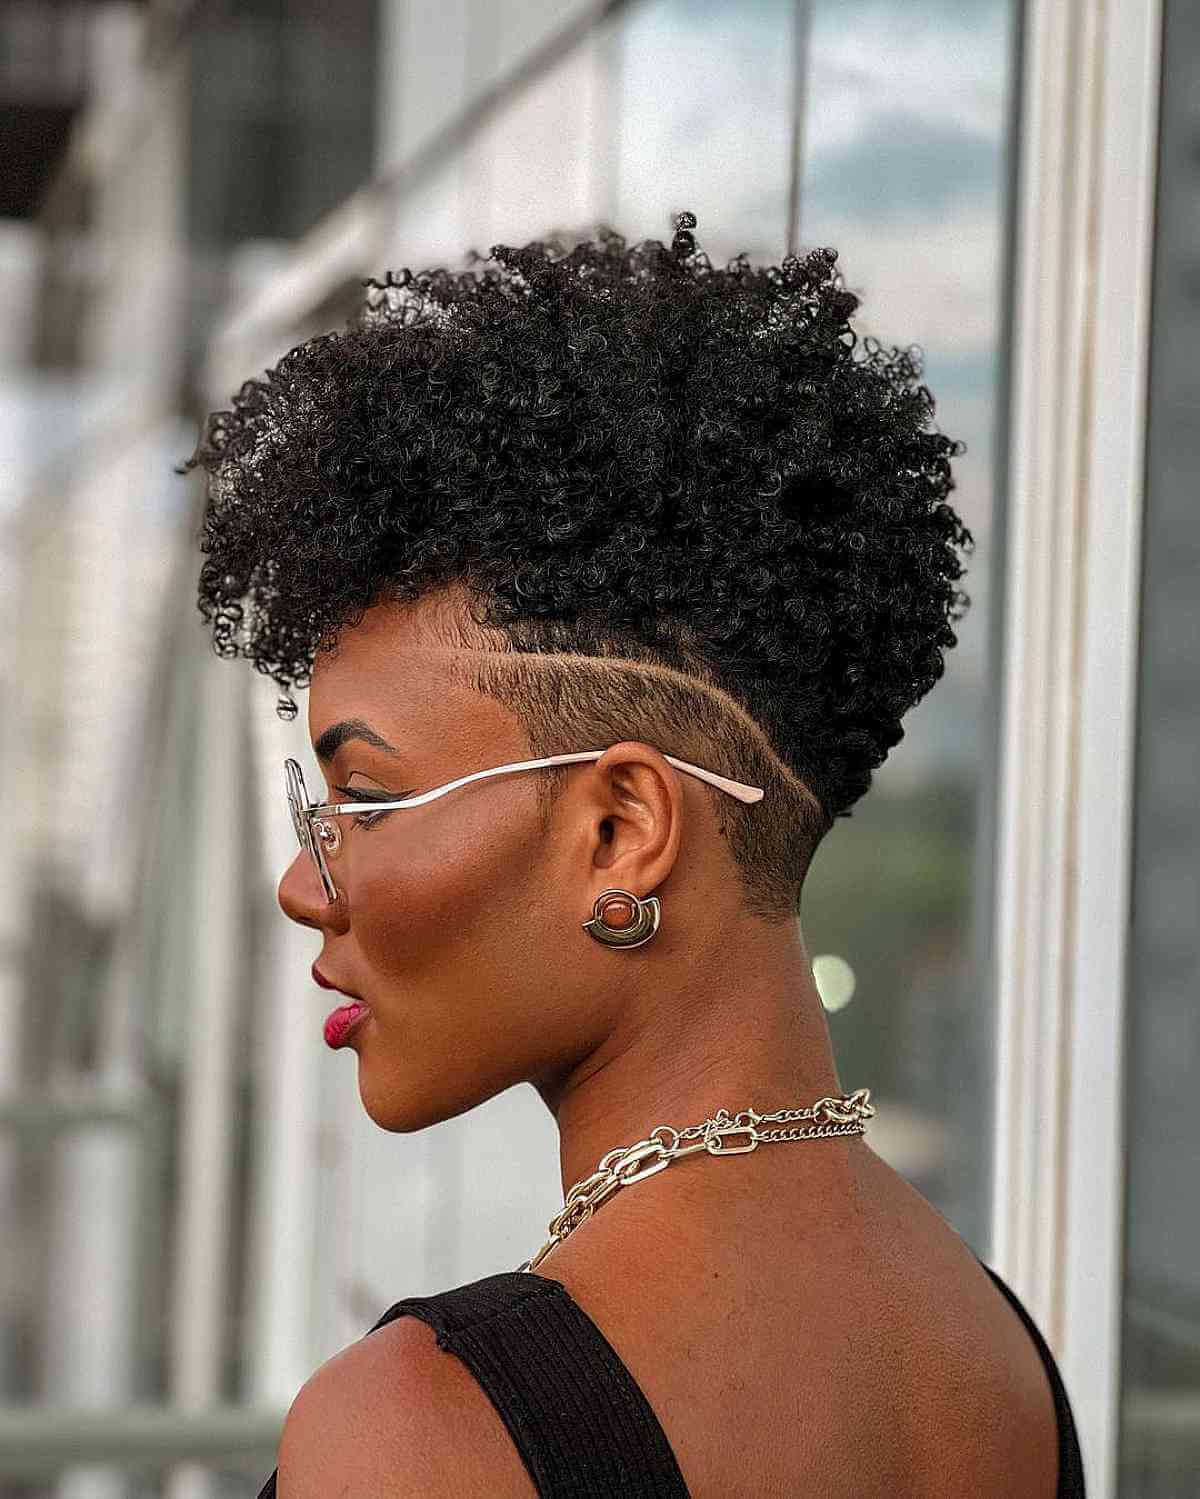 Short natural hair with low undercut pattern